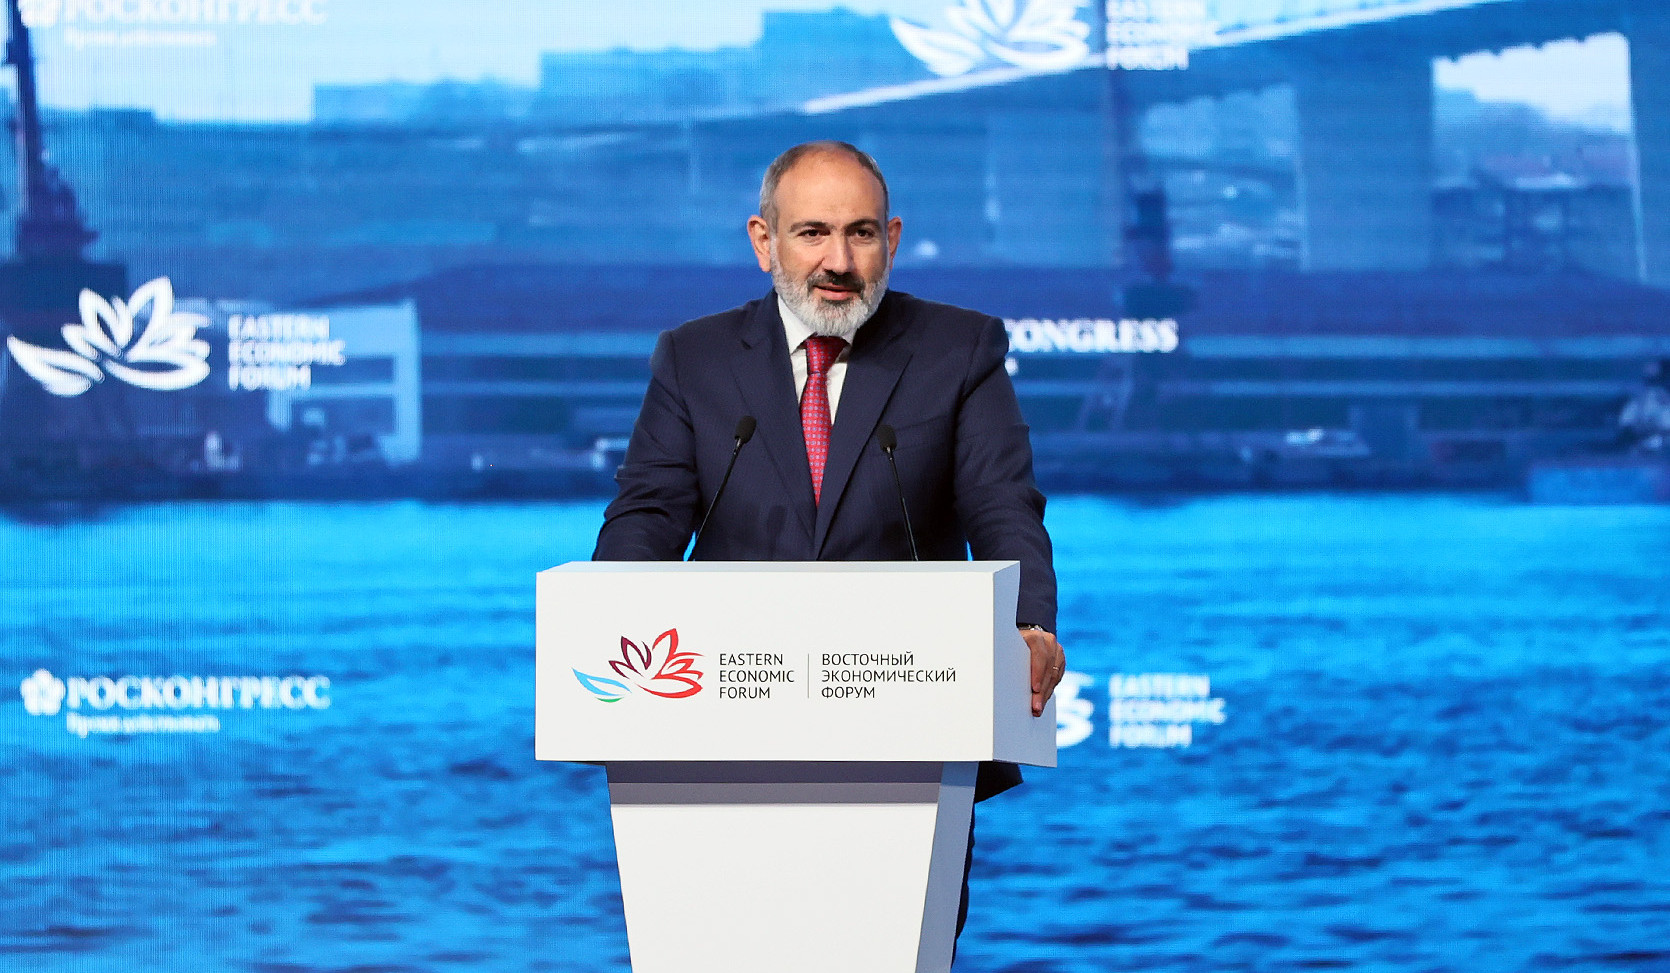 We hope that in close cooperation with Russia and our partners we will be able to manage and keep our regional situation under control: Pashinyan